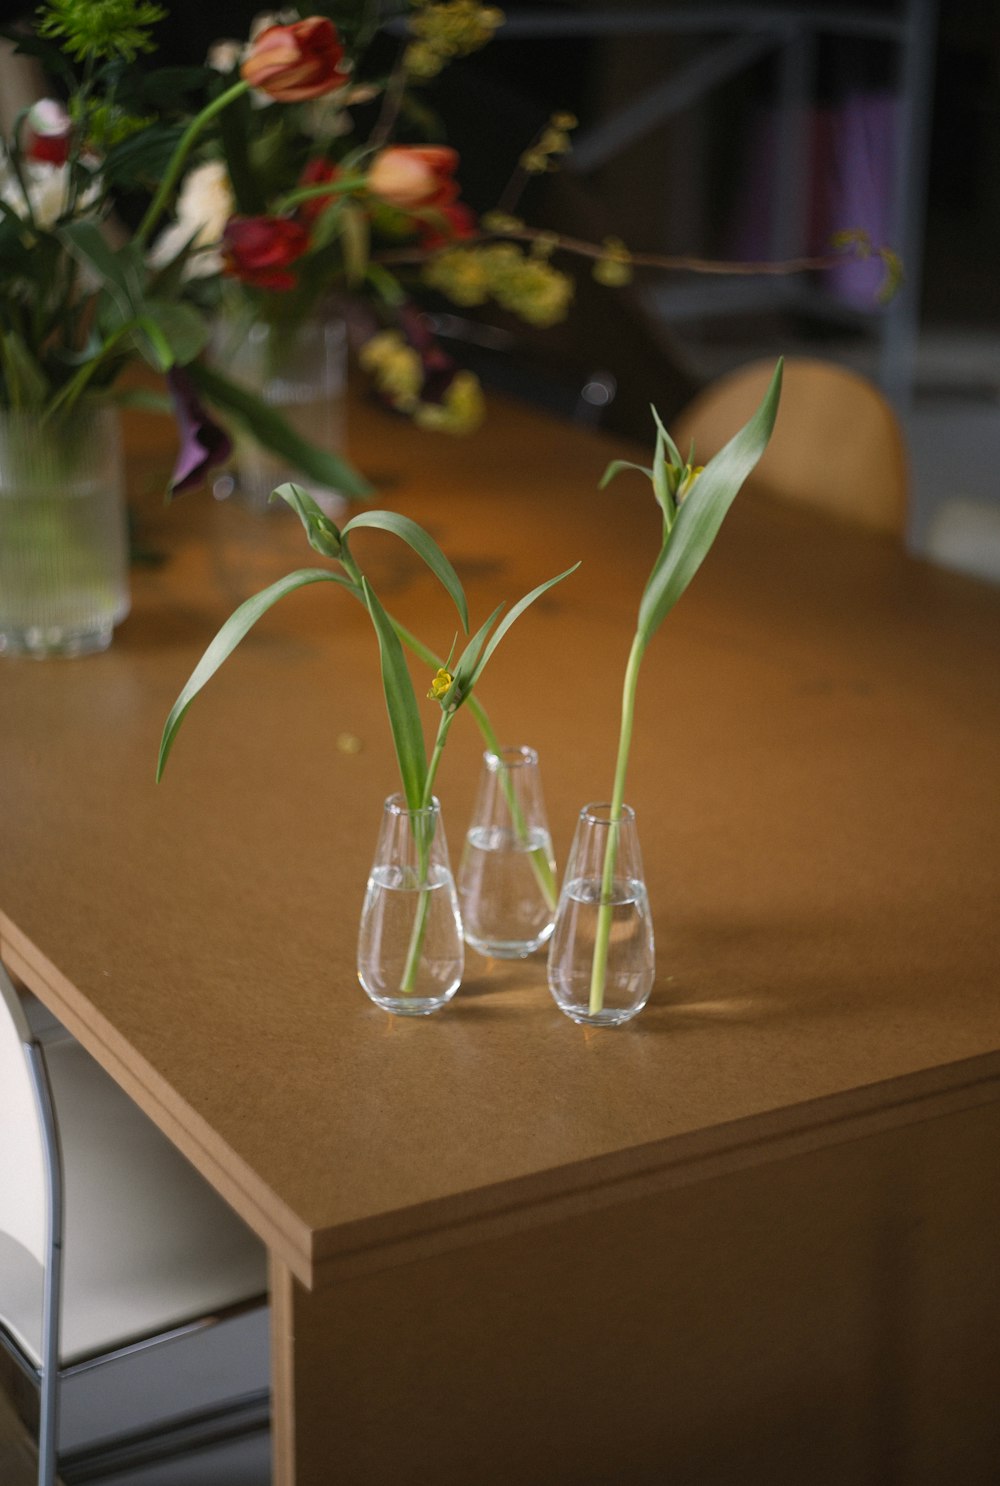 a group of glass vases with flowers in them